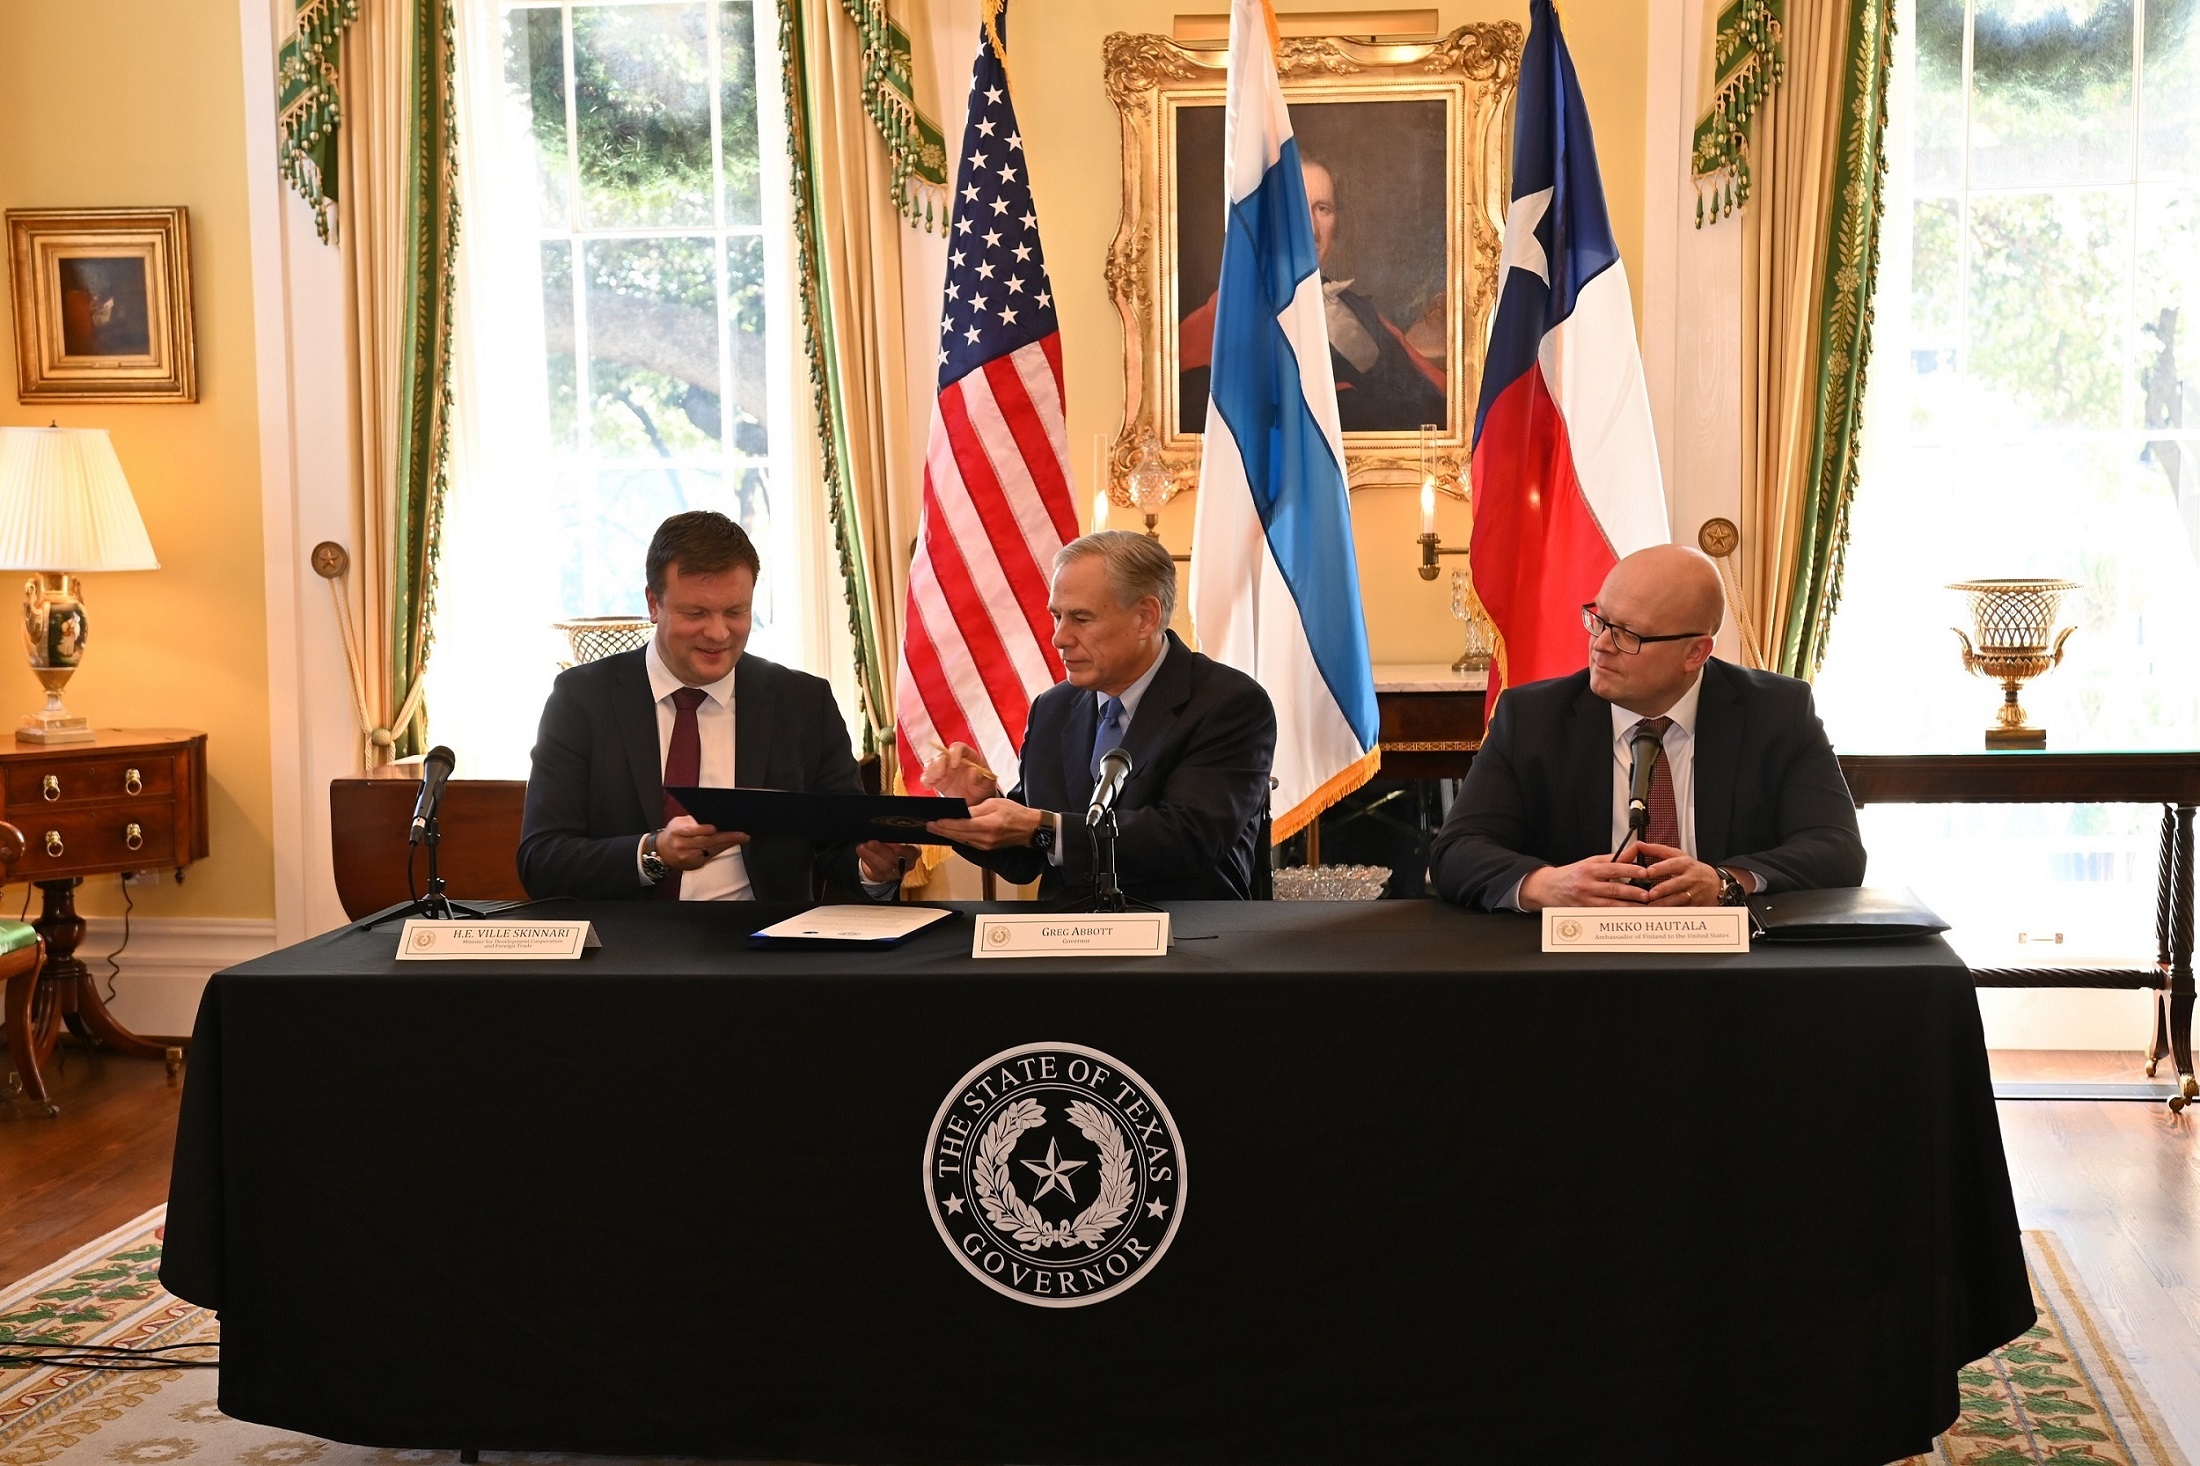 Minister Skinnari and Governor Abbott signing a Statement of Mutual Cooperation.